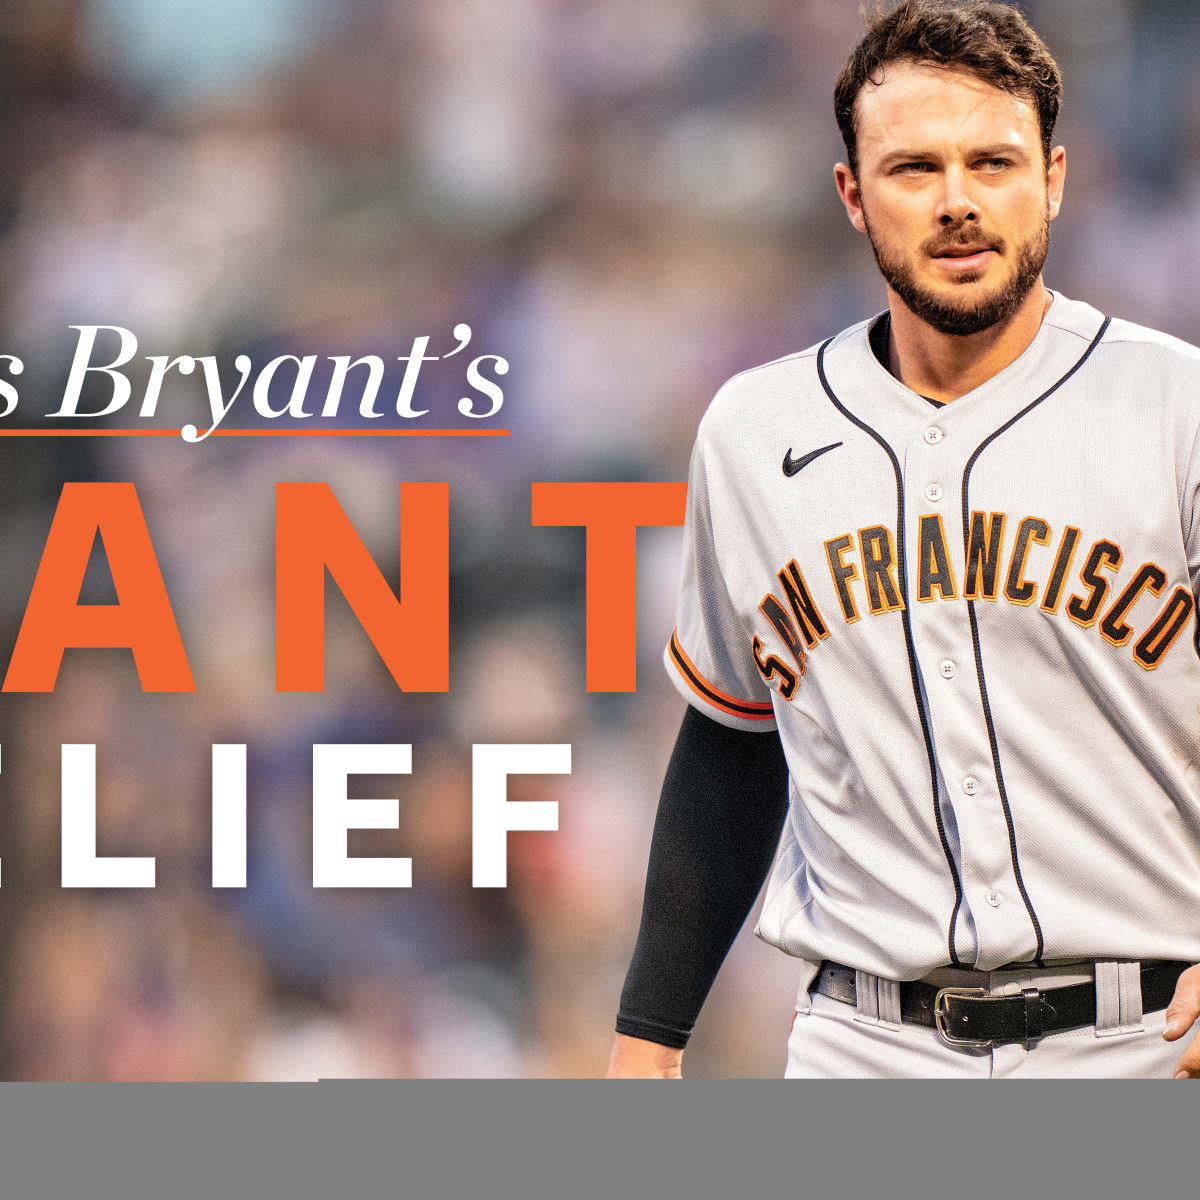 Kris Bryant: Inside his journey to Giants from Cubs - Sports Illustrated